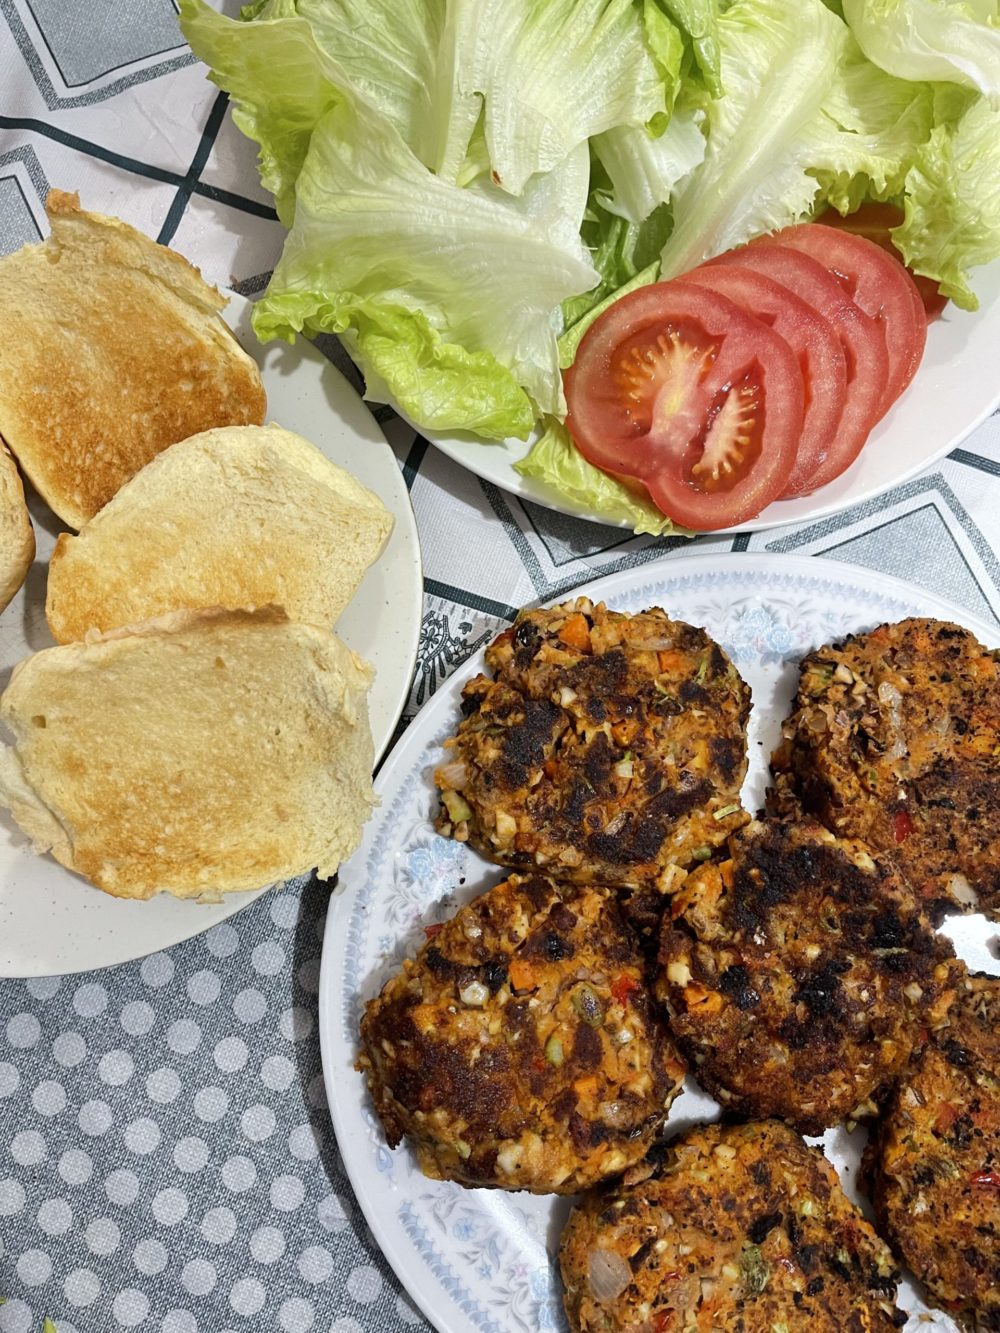 Plates of vegan burgers, bread, and toppings against a gray and white background